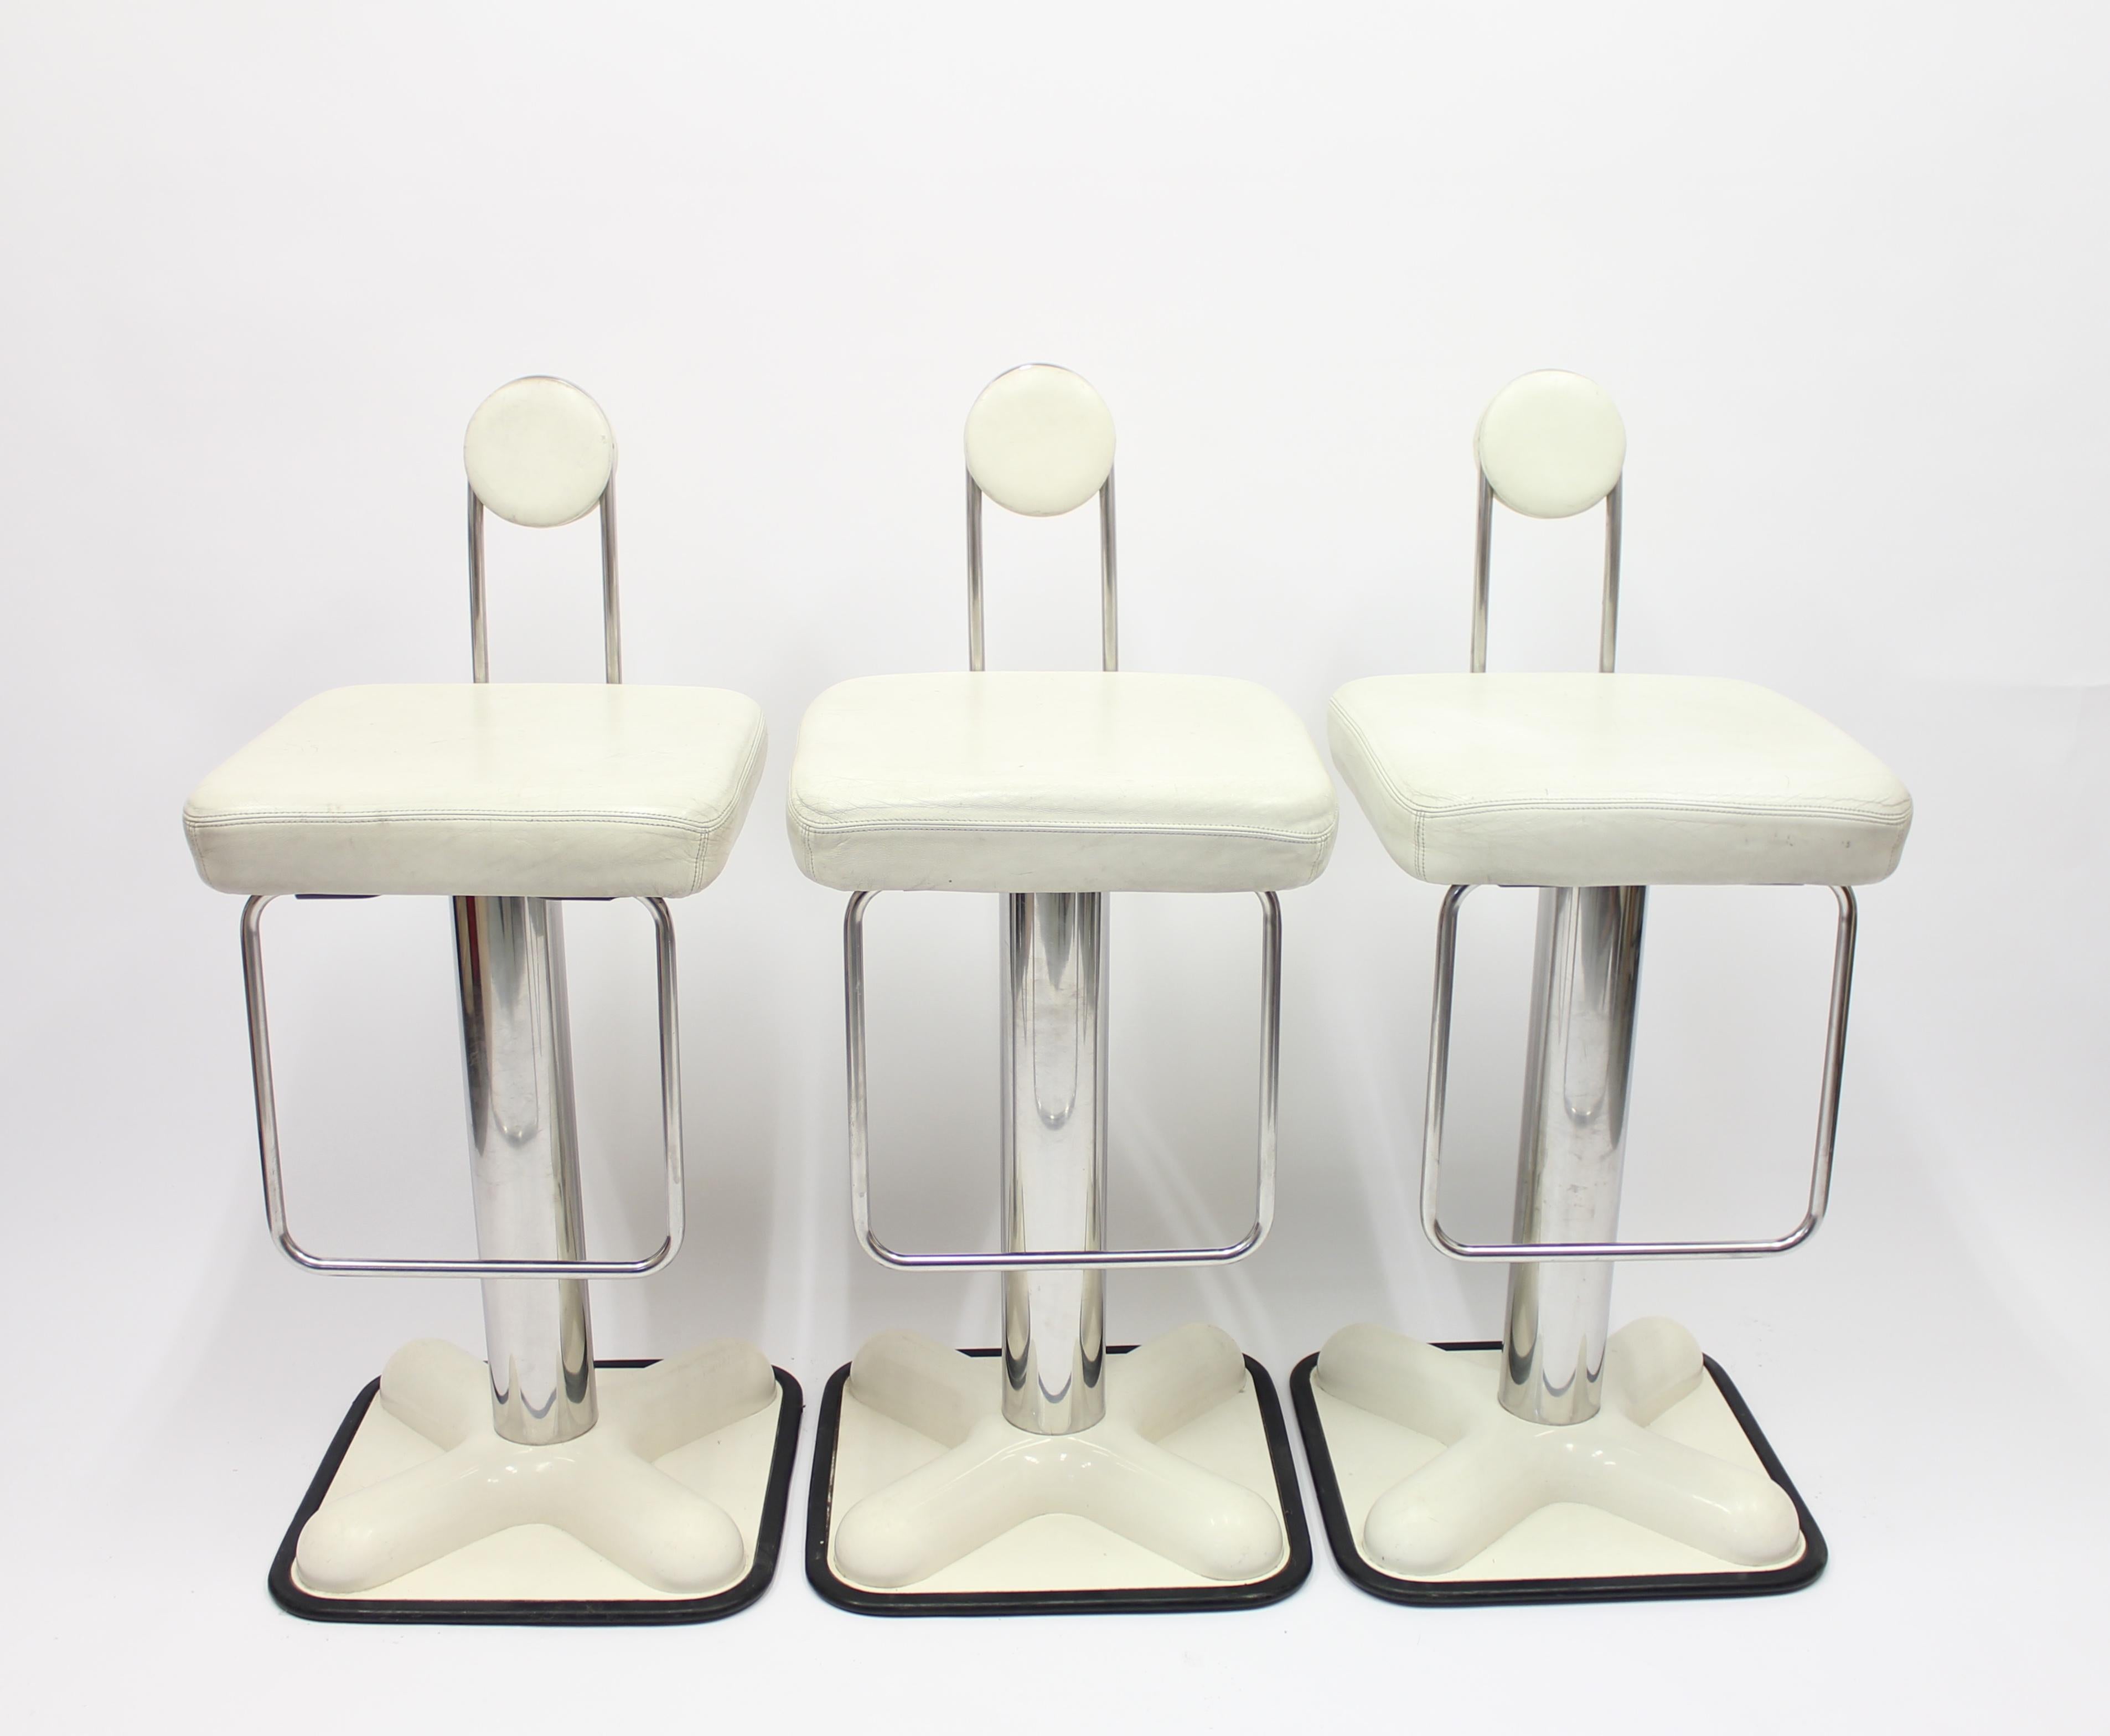 Set of 3 Birillo bar stools designed by Joe Colombo in 1971 for Italian manufacturer Zanotta. These examples are from the 1970s. White leather seat and back on a chrome and metal/plastic base. Leather and bases with patina from usage over the years.